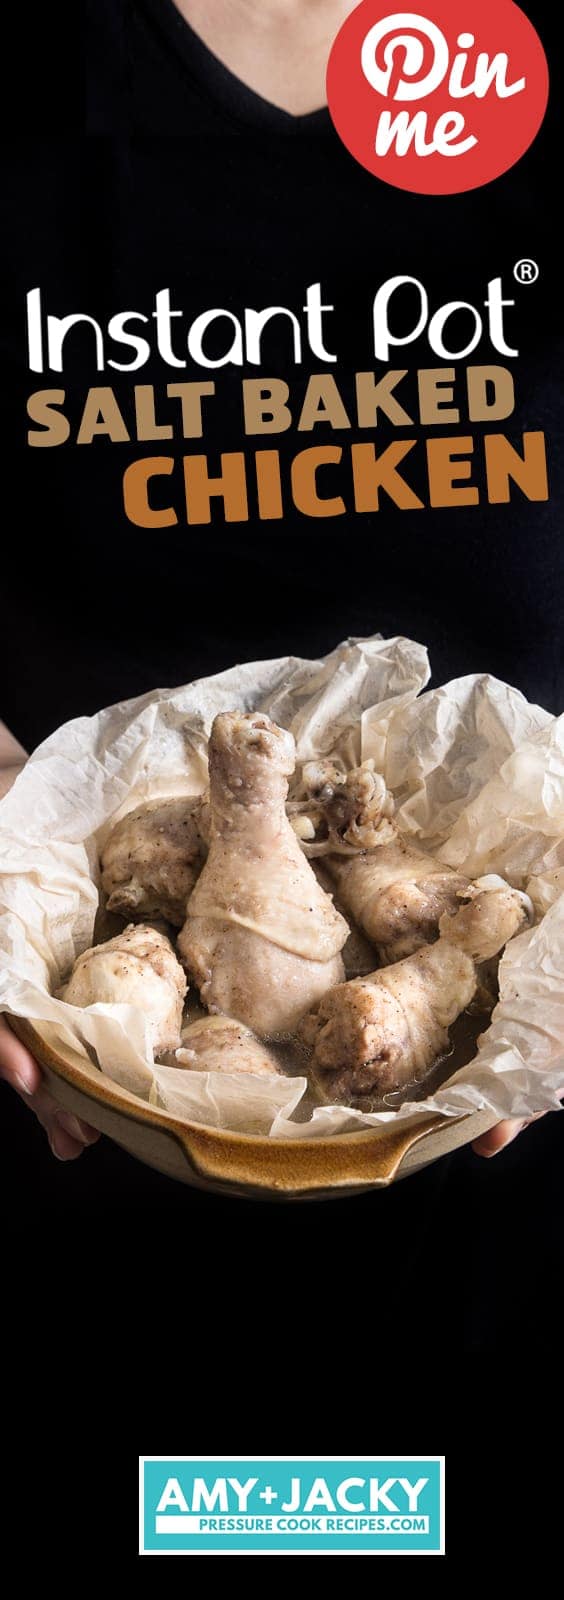 Instant Pot Salt Baked Chicken | Pressure Cooker Salt Baked Chicken | Instant Pot Chicken | Pressure Cooker Chicken | Instapot Chicken | Chicken Recipes | Chinese Recipes #instantpot #pressurecooker #chicken #easy #chinese #recipes